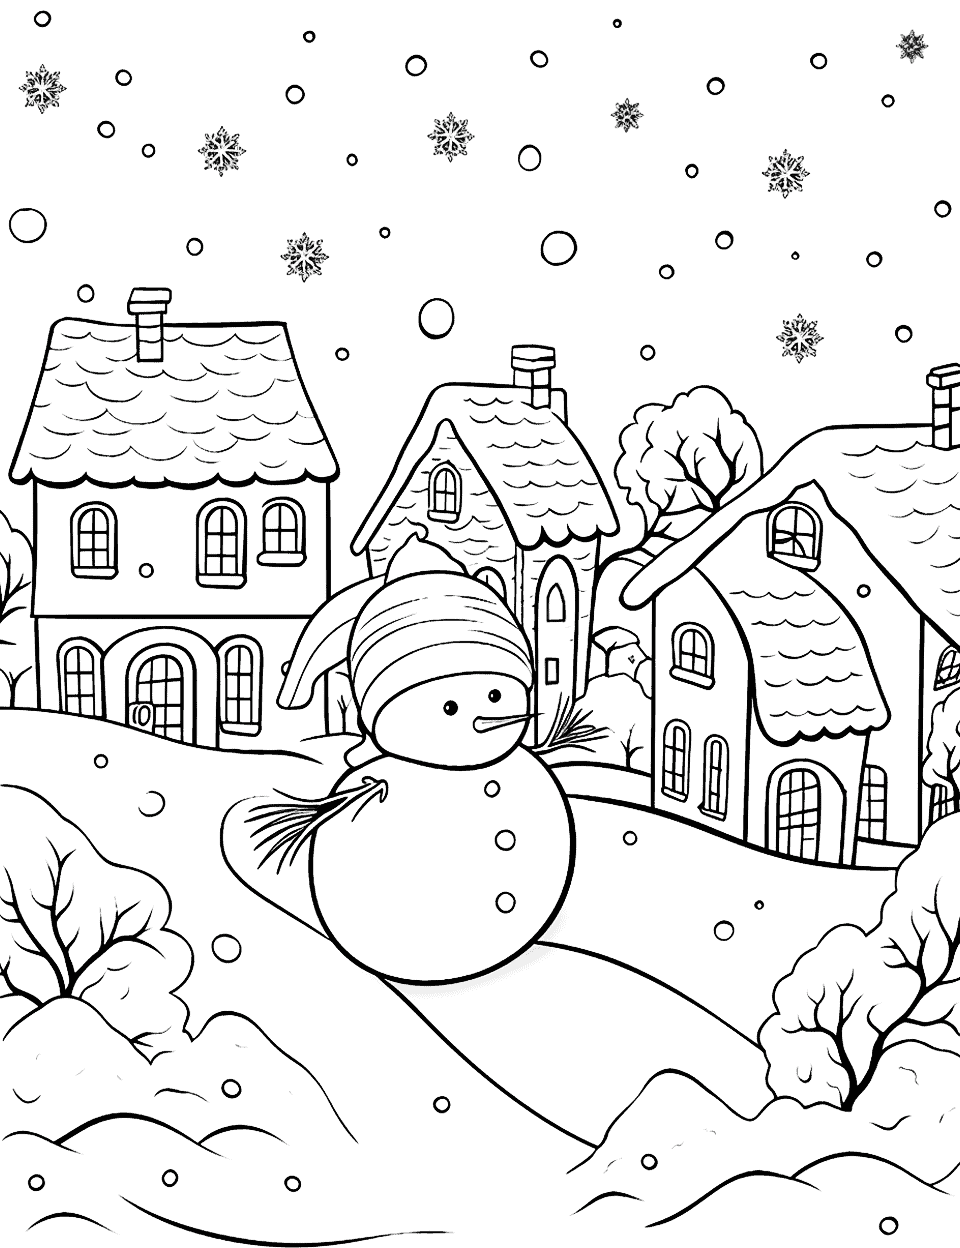 Winter Night Scene Coloring Page - A calming night scene with snow falling on houses.